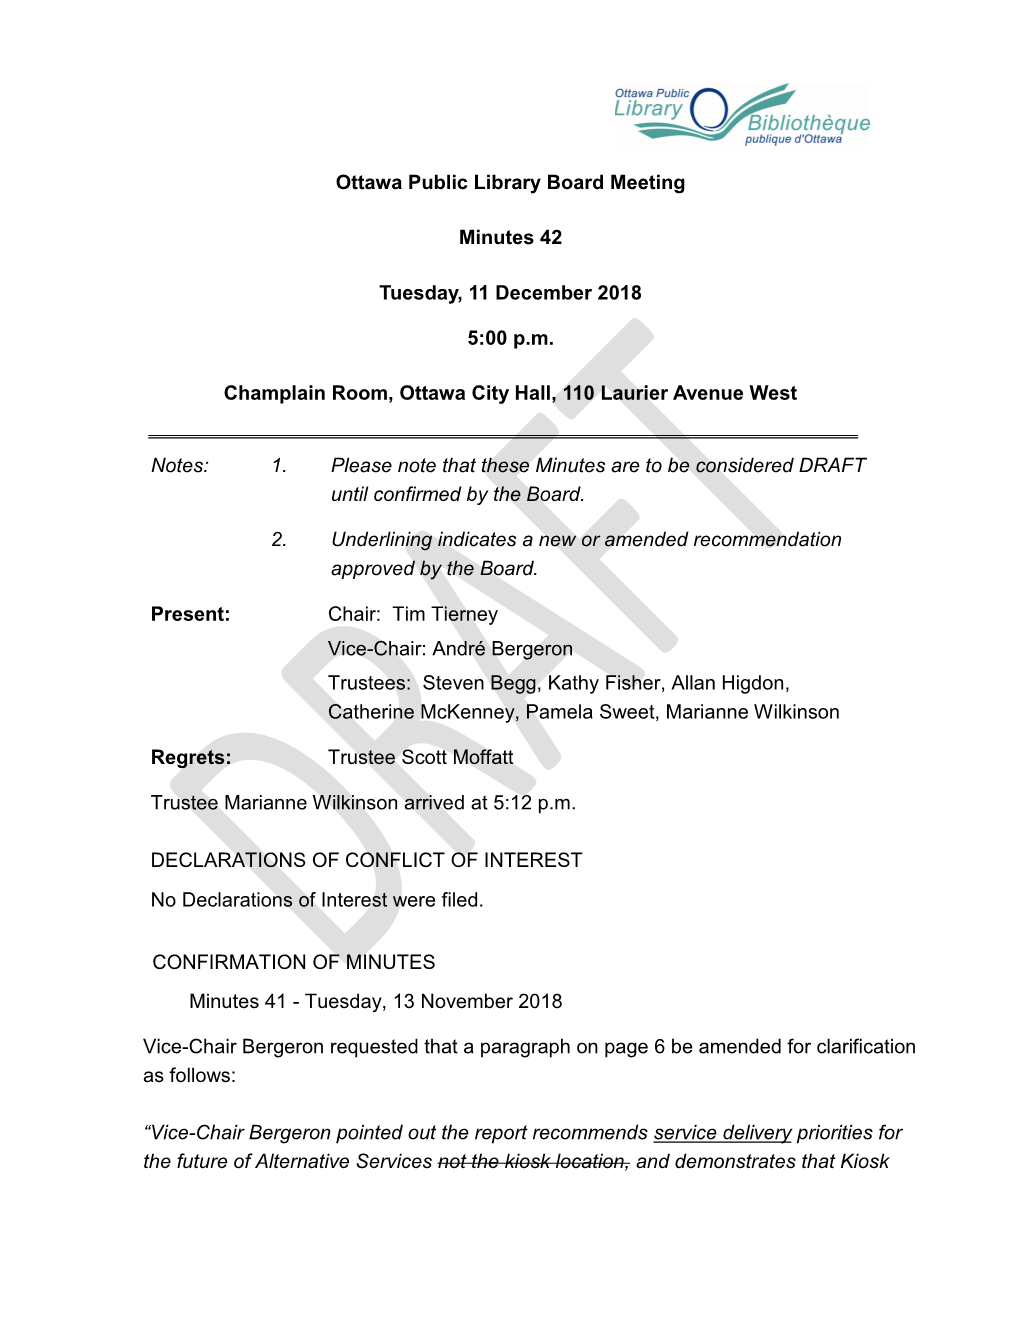 Ottawa Public Library Board Meeting Minutes 42 Tuesday, 11 December